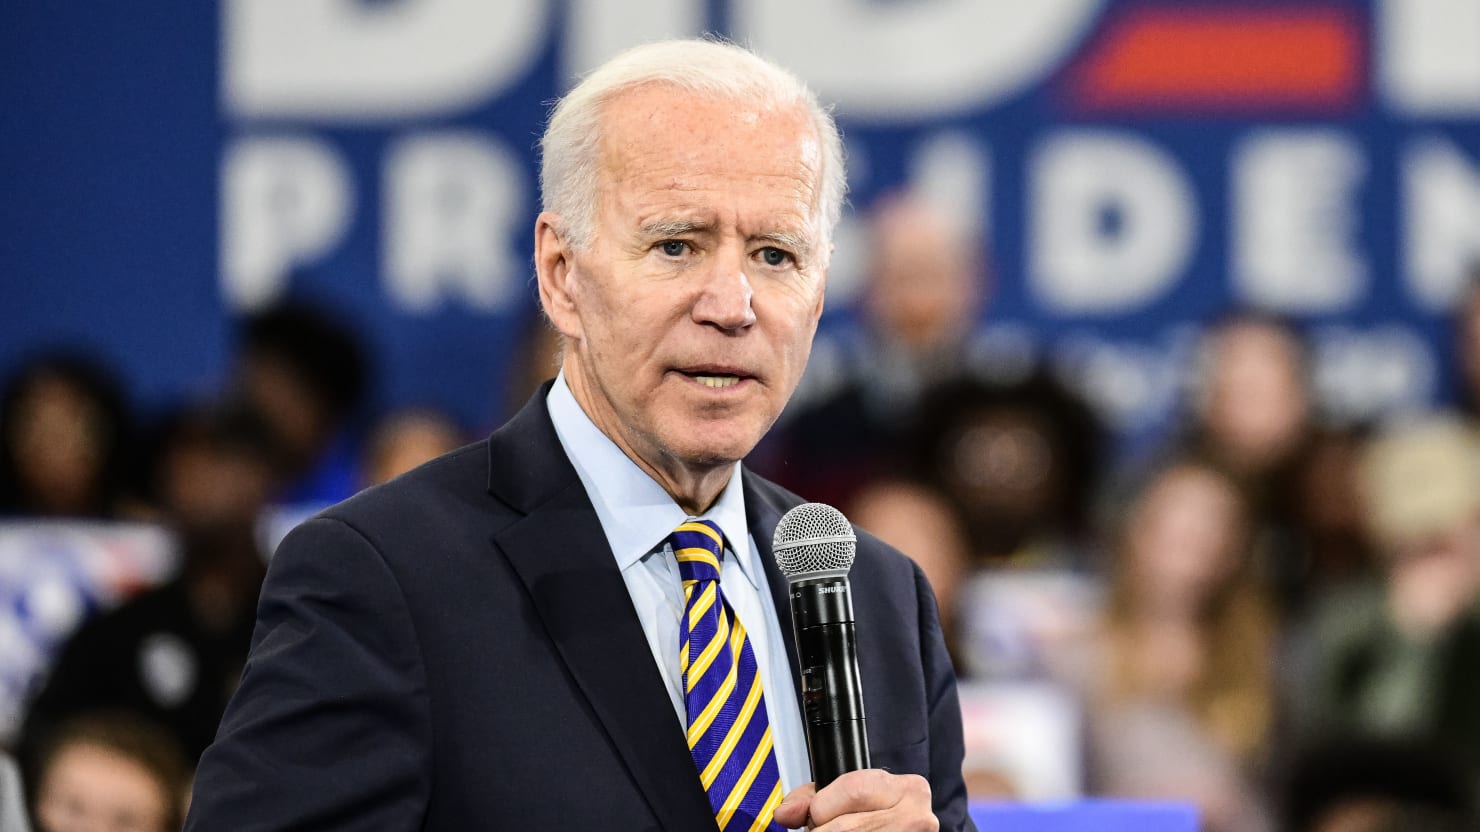 Biden: Lindsey Graham ‘Is About to Go Down’ in Way He Will ‘Regret’